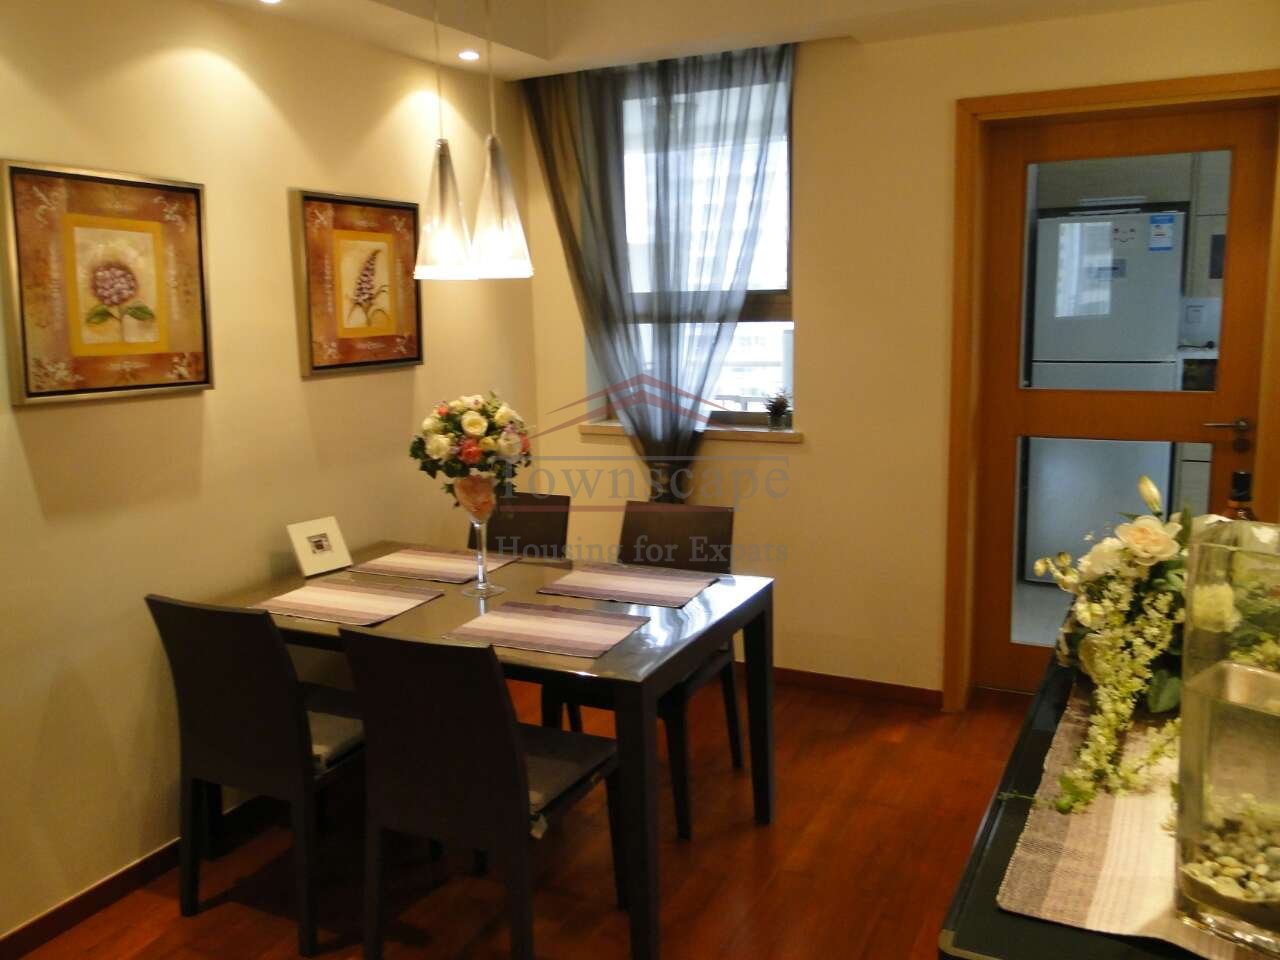 Shanghai house for rent Fantastic 4 Bed Apartment in Yanlord Town Pudong